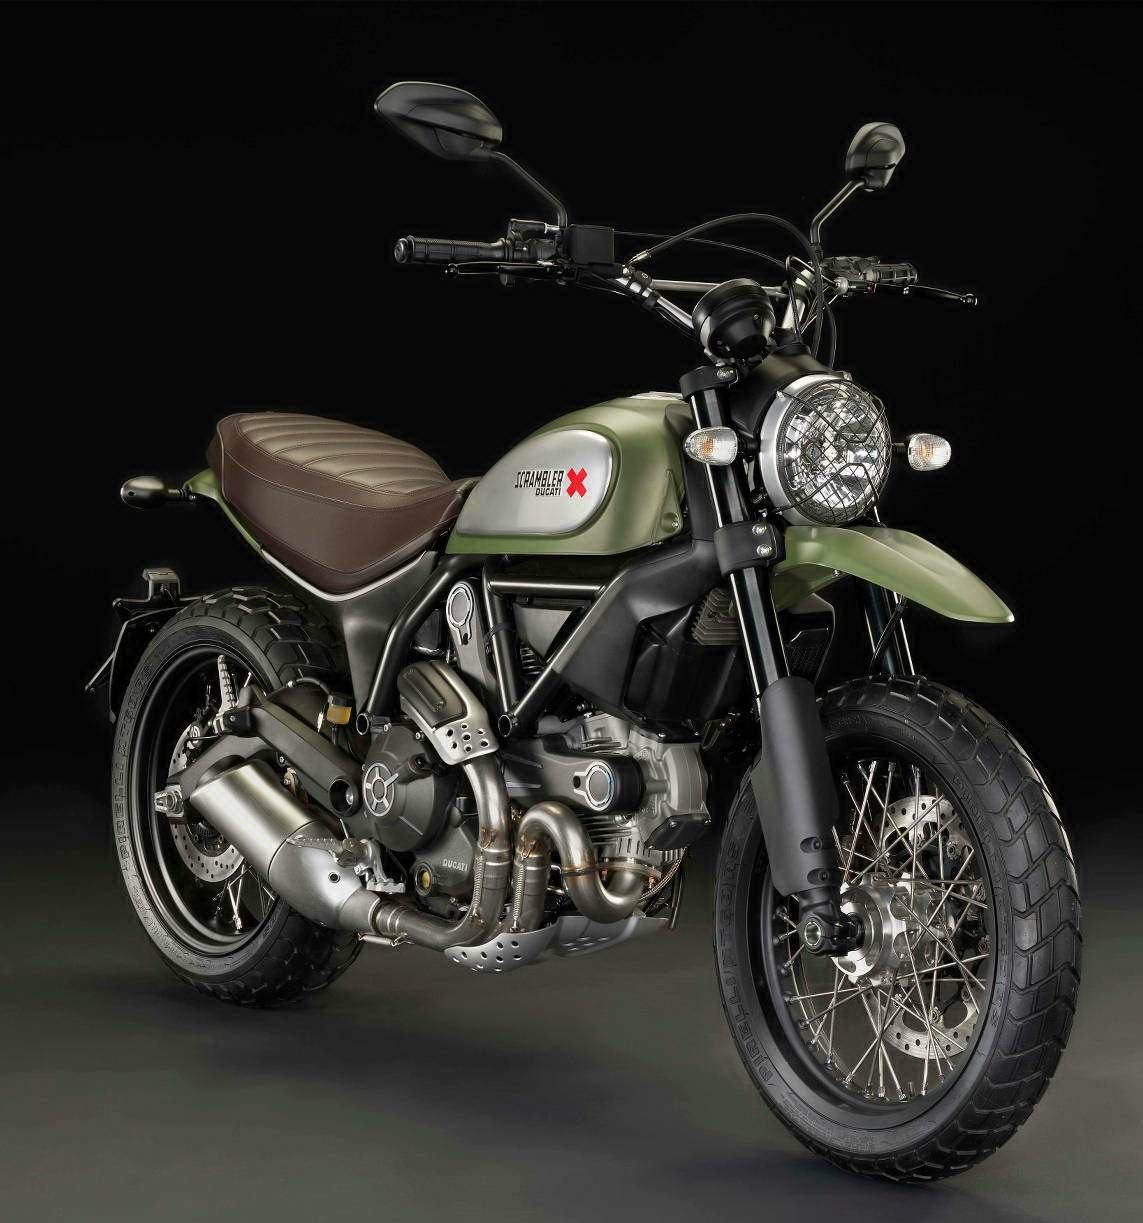 Ducati Scrambler Urban Enduro For Sale Specifications, Price and Images